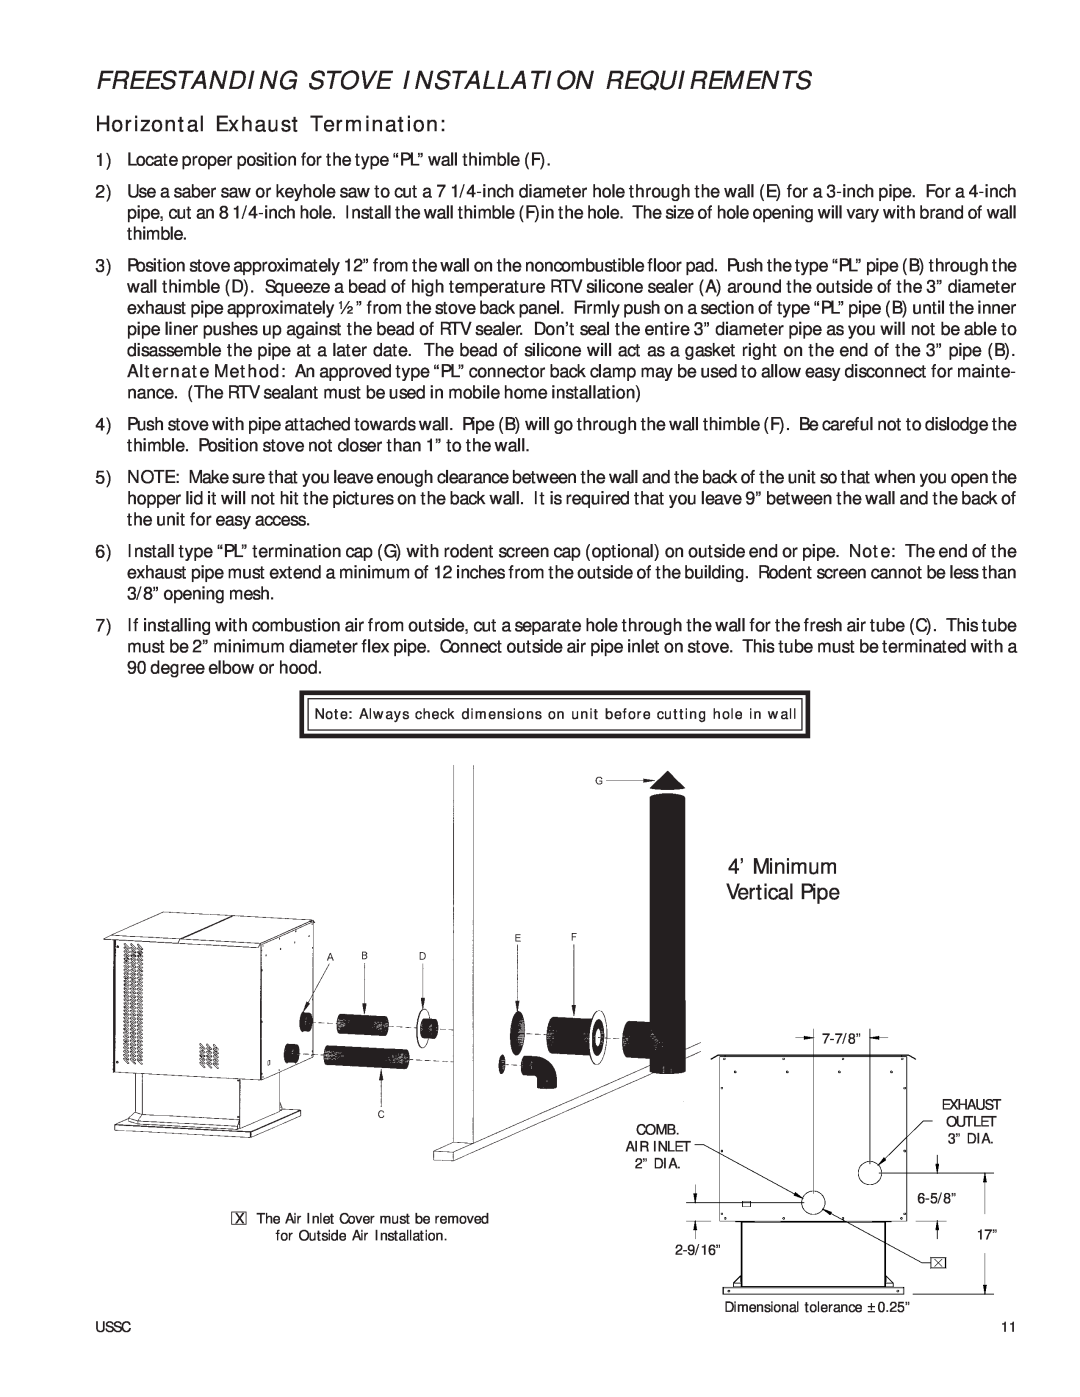 United States Stove 6035 owner manual Freestanding Stove Installation Requirements, Horizontal Exhaust Termination 